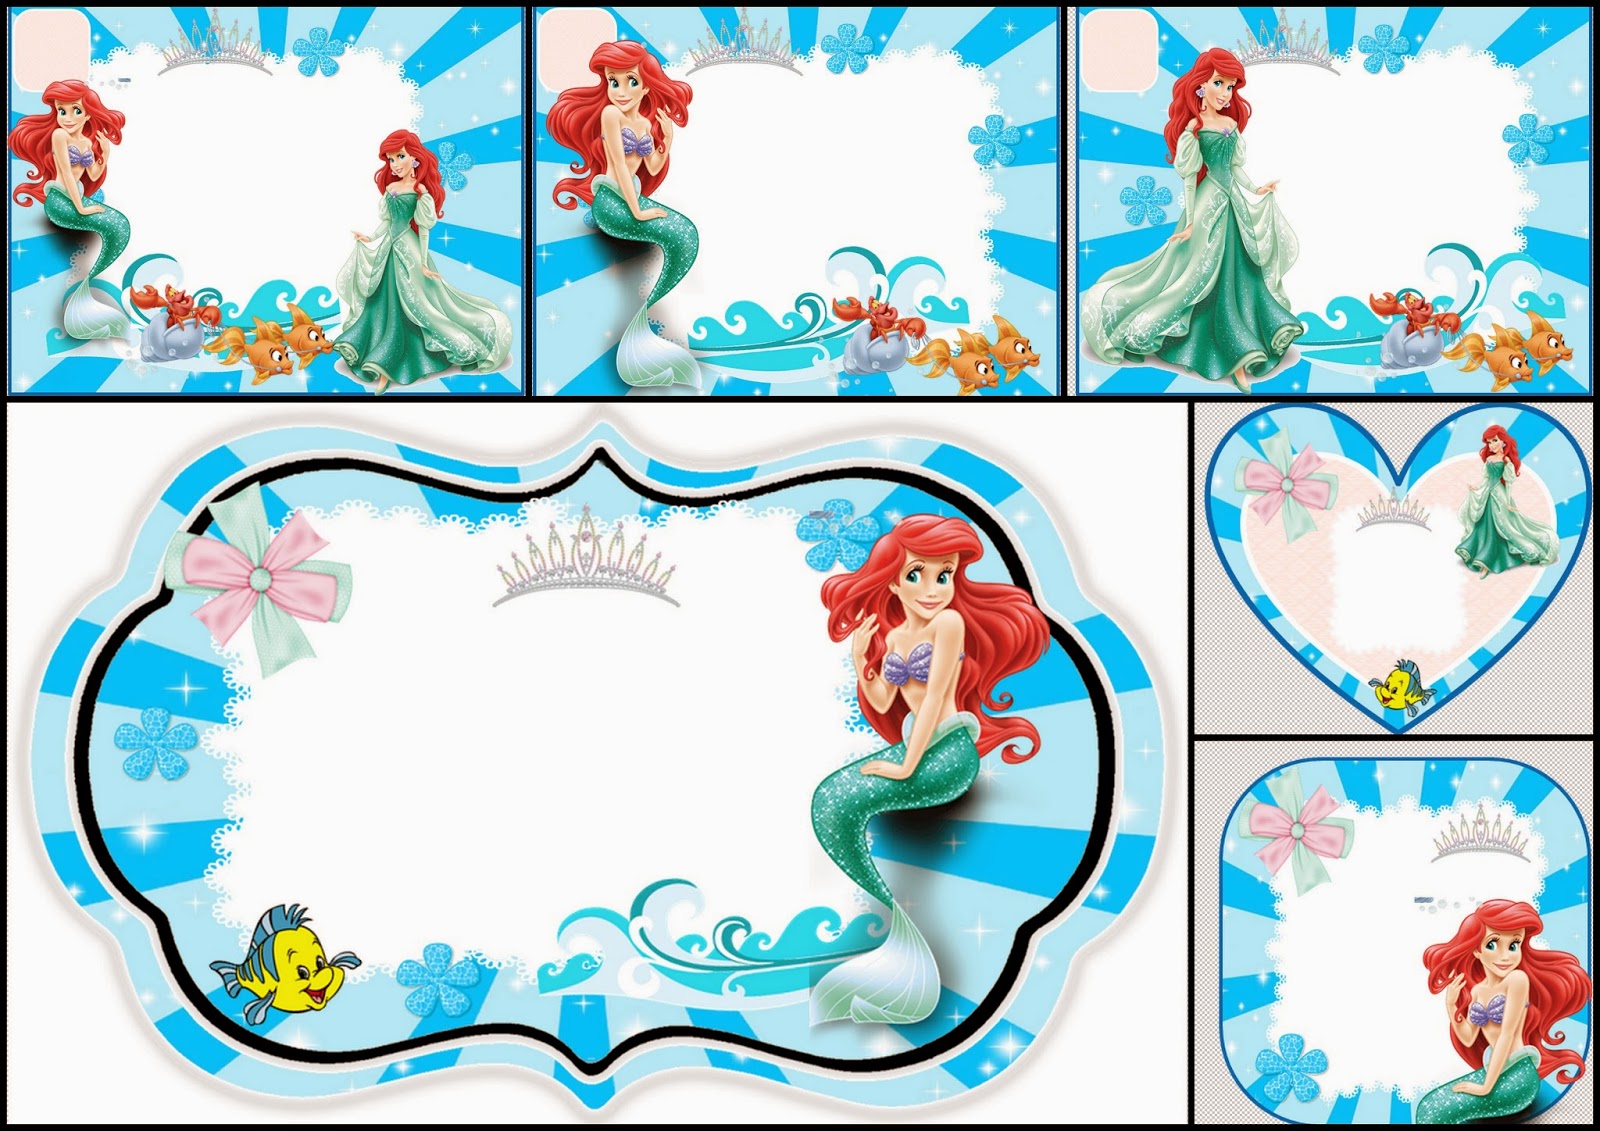 The Little Mermaid Free Printable Invitations Cards Or Photo Frames 